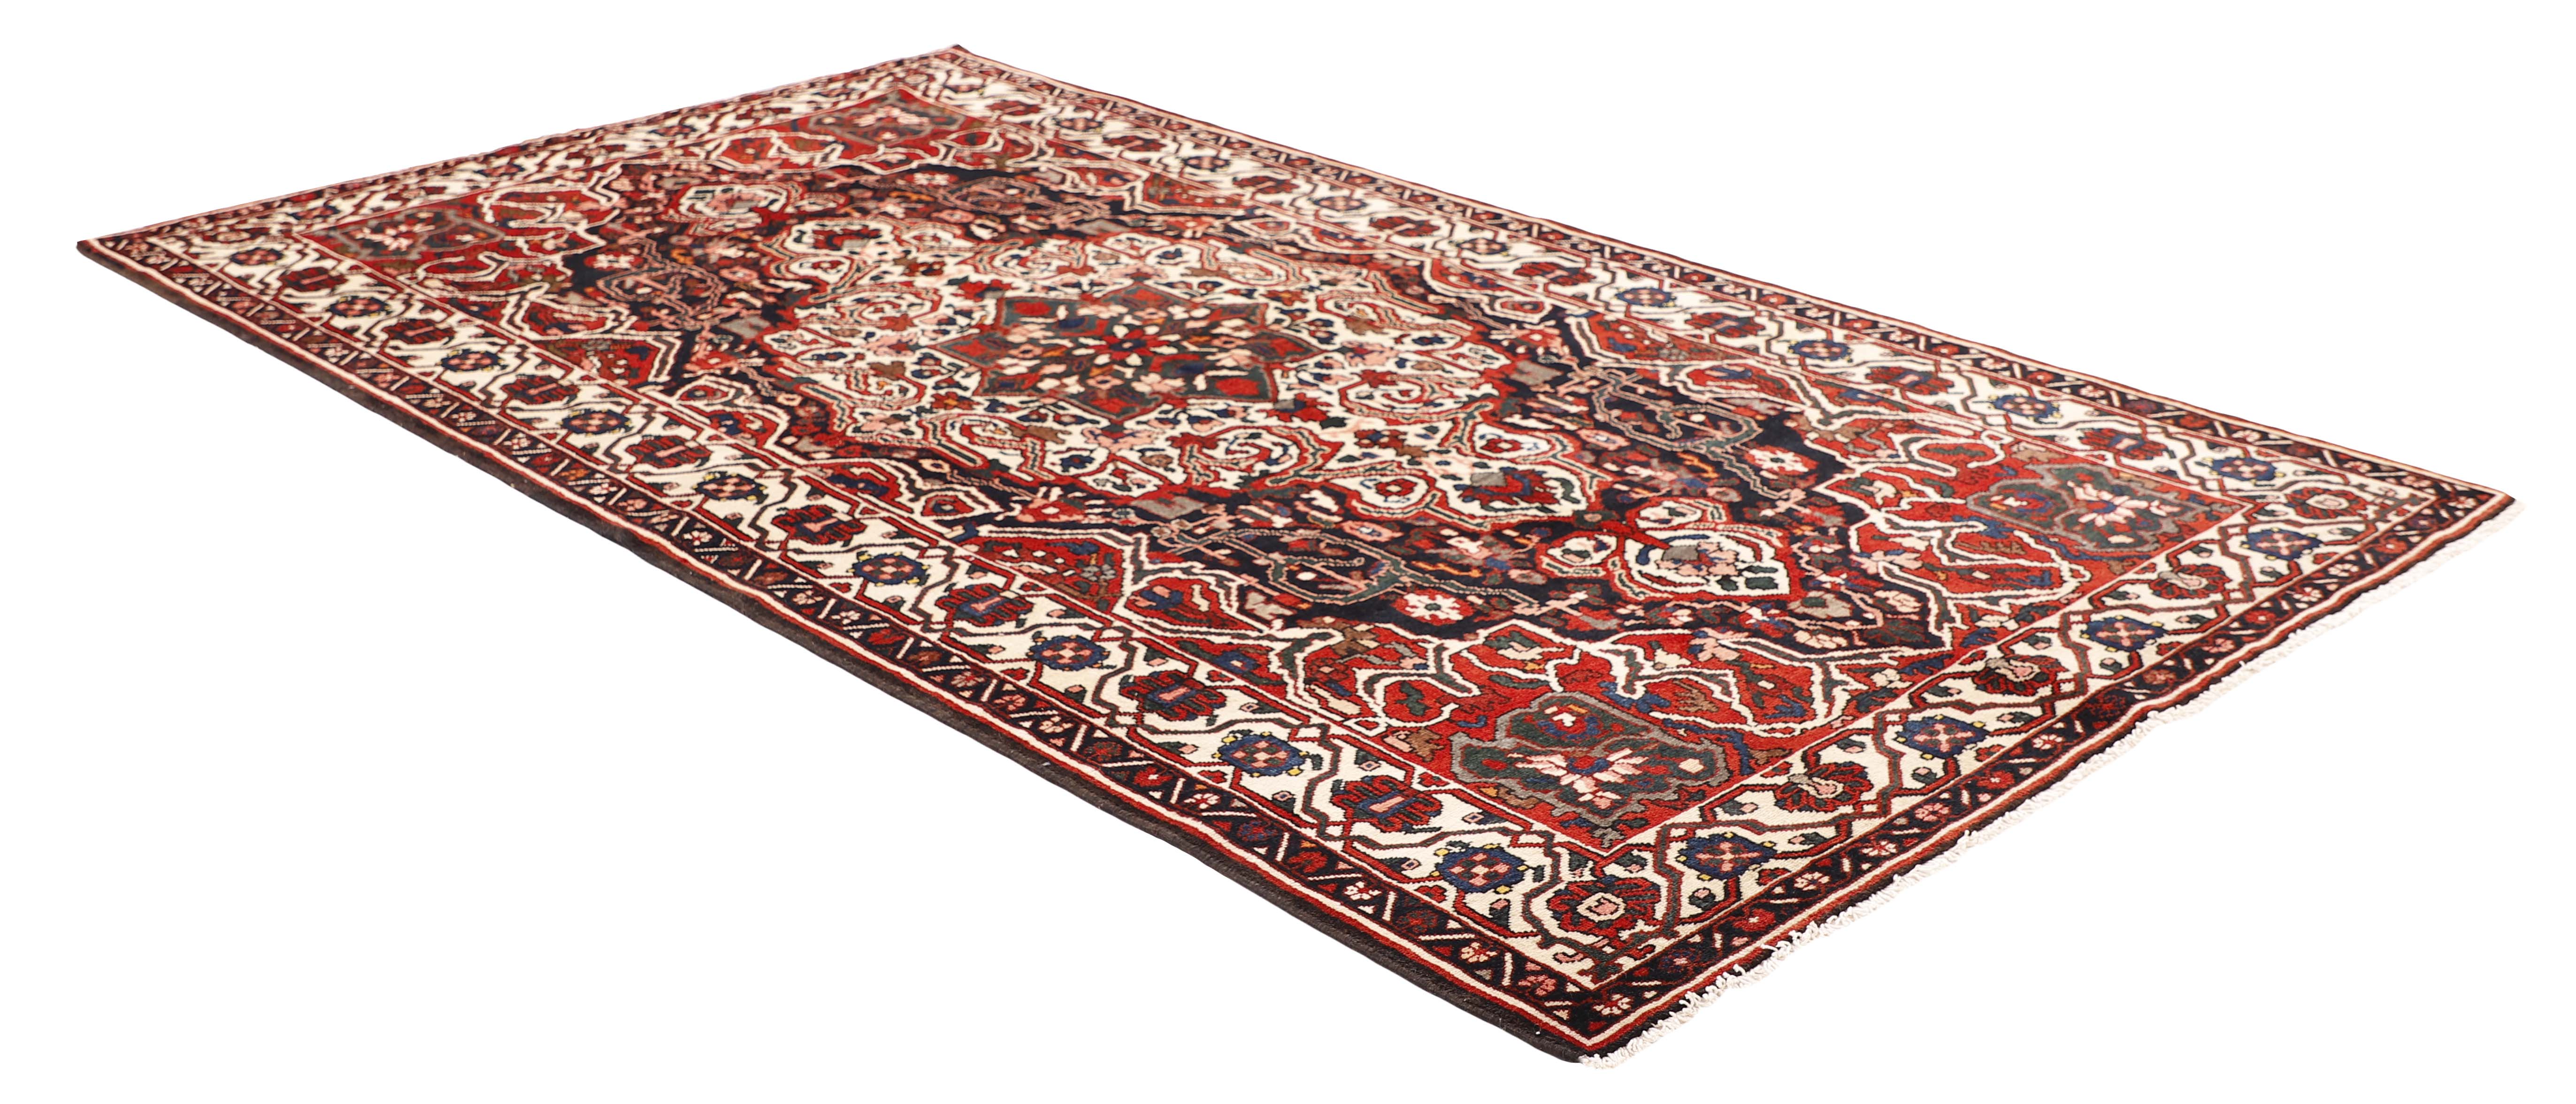 Authentic persian rug with traditional pattern in red